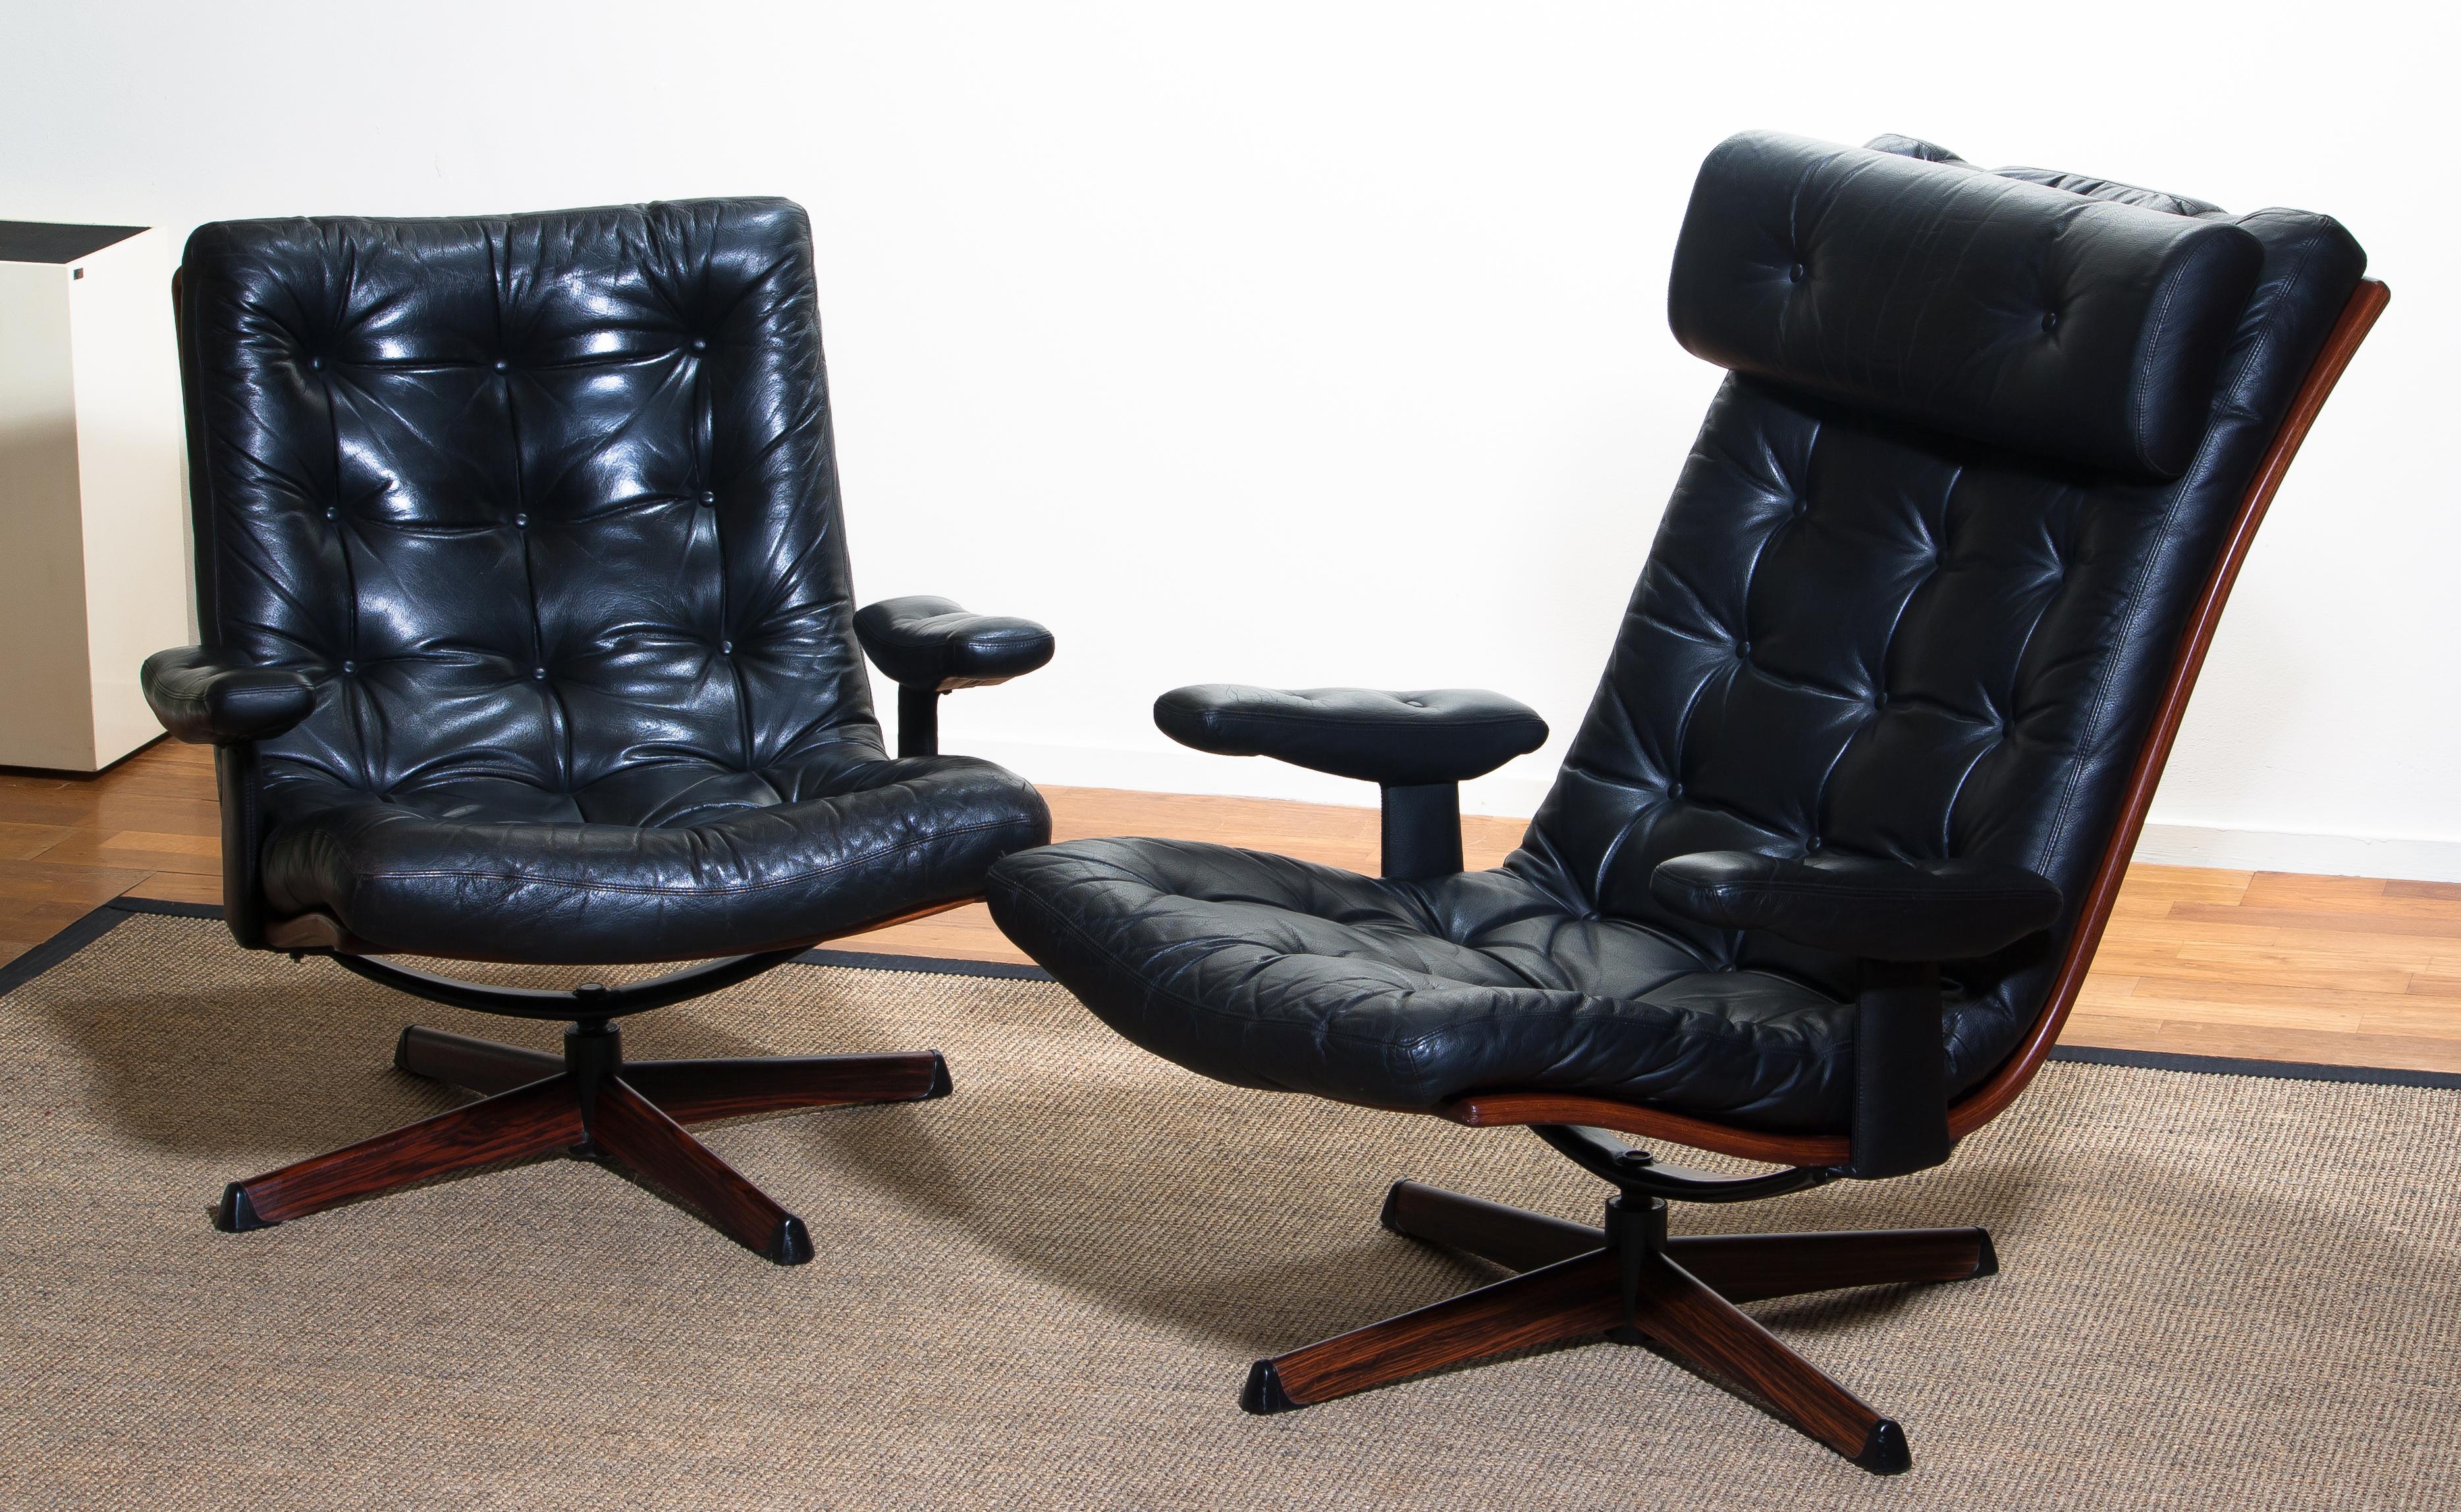 Beautiful set of two extremely comfortable and matching swivel chairs by Gote Design Nassjo Sweden, 1960
The metal swivel stands are covered with an Jakaranda print.
The chairs are upholstered with black sturdy leather and all in perfect